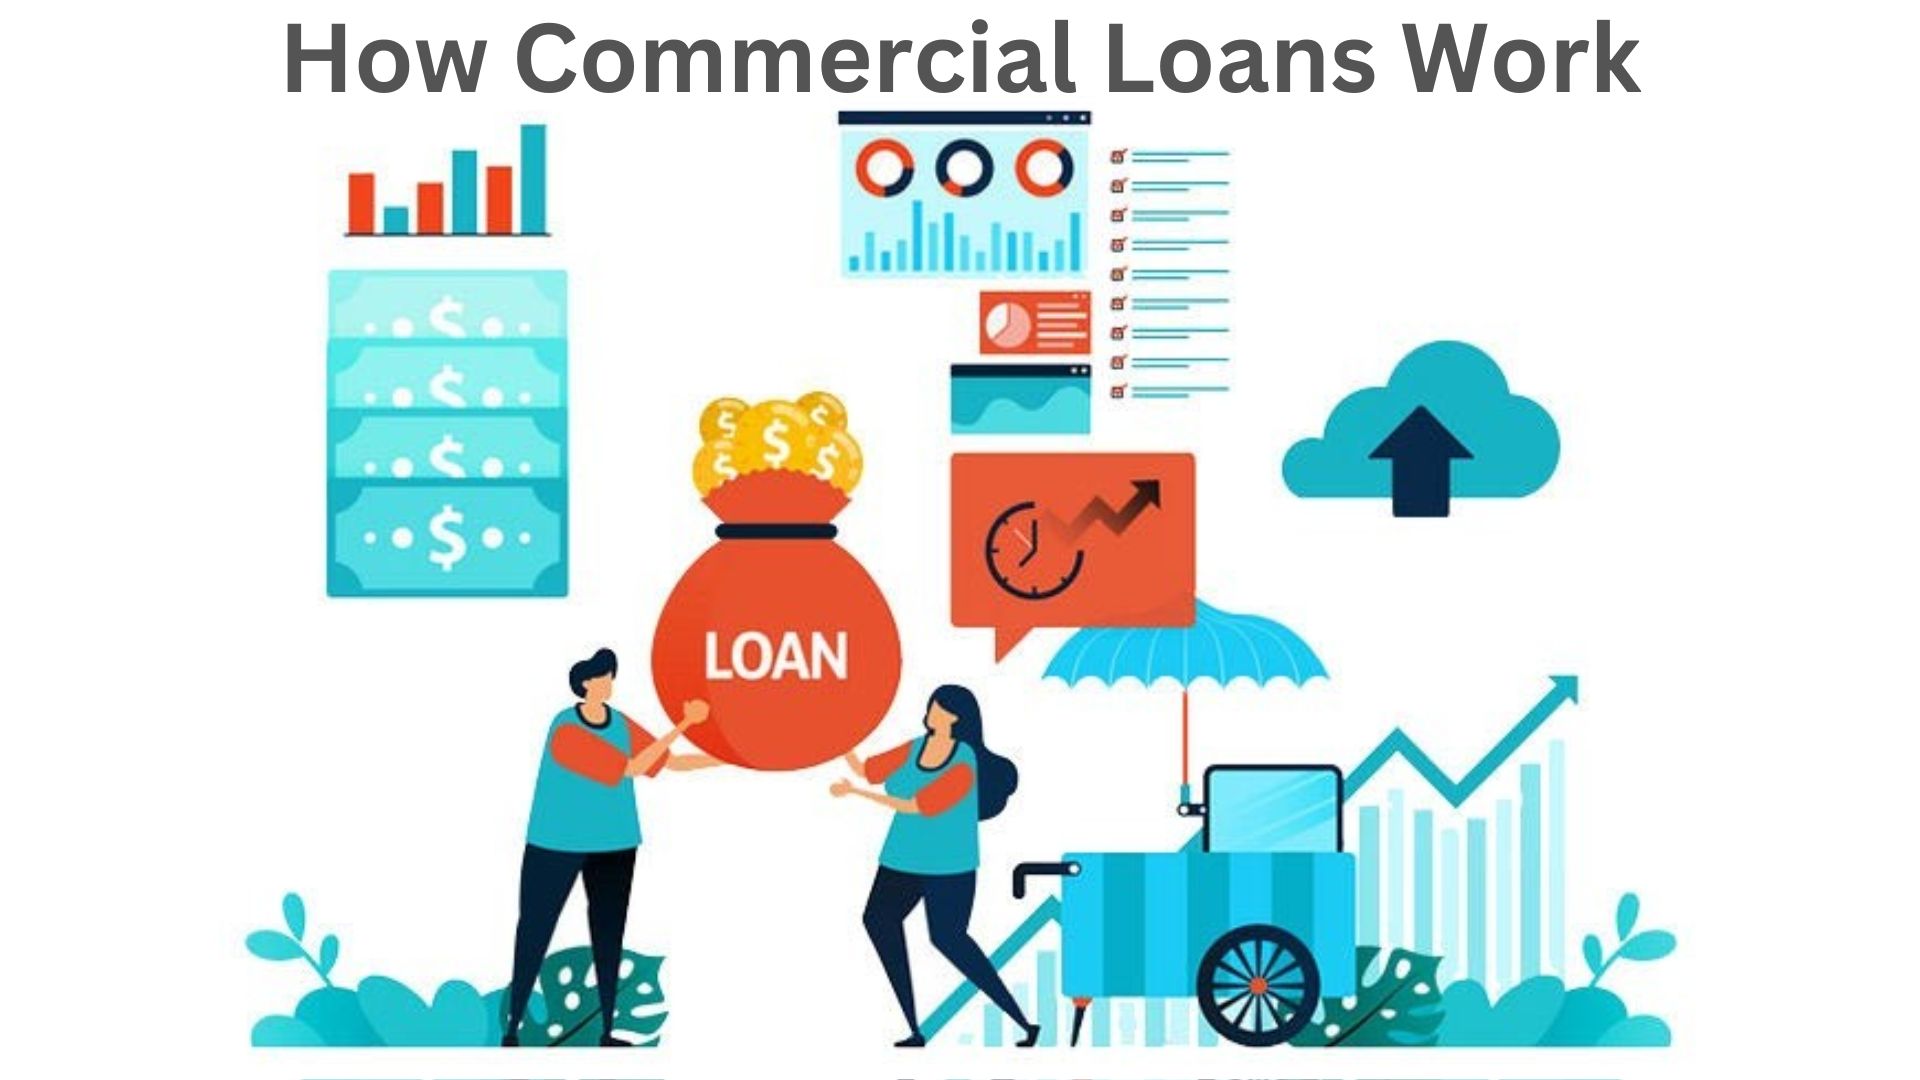 How Commercial Loans Work